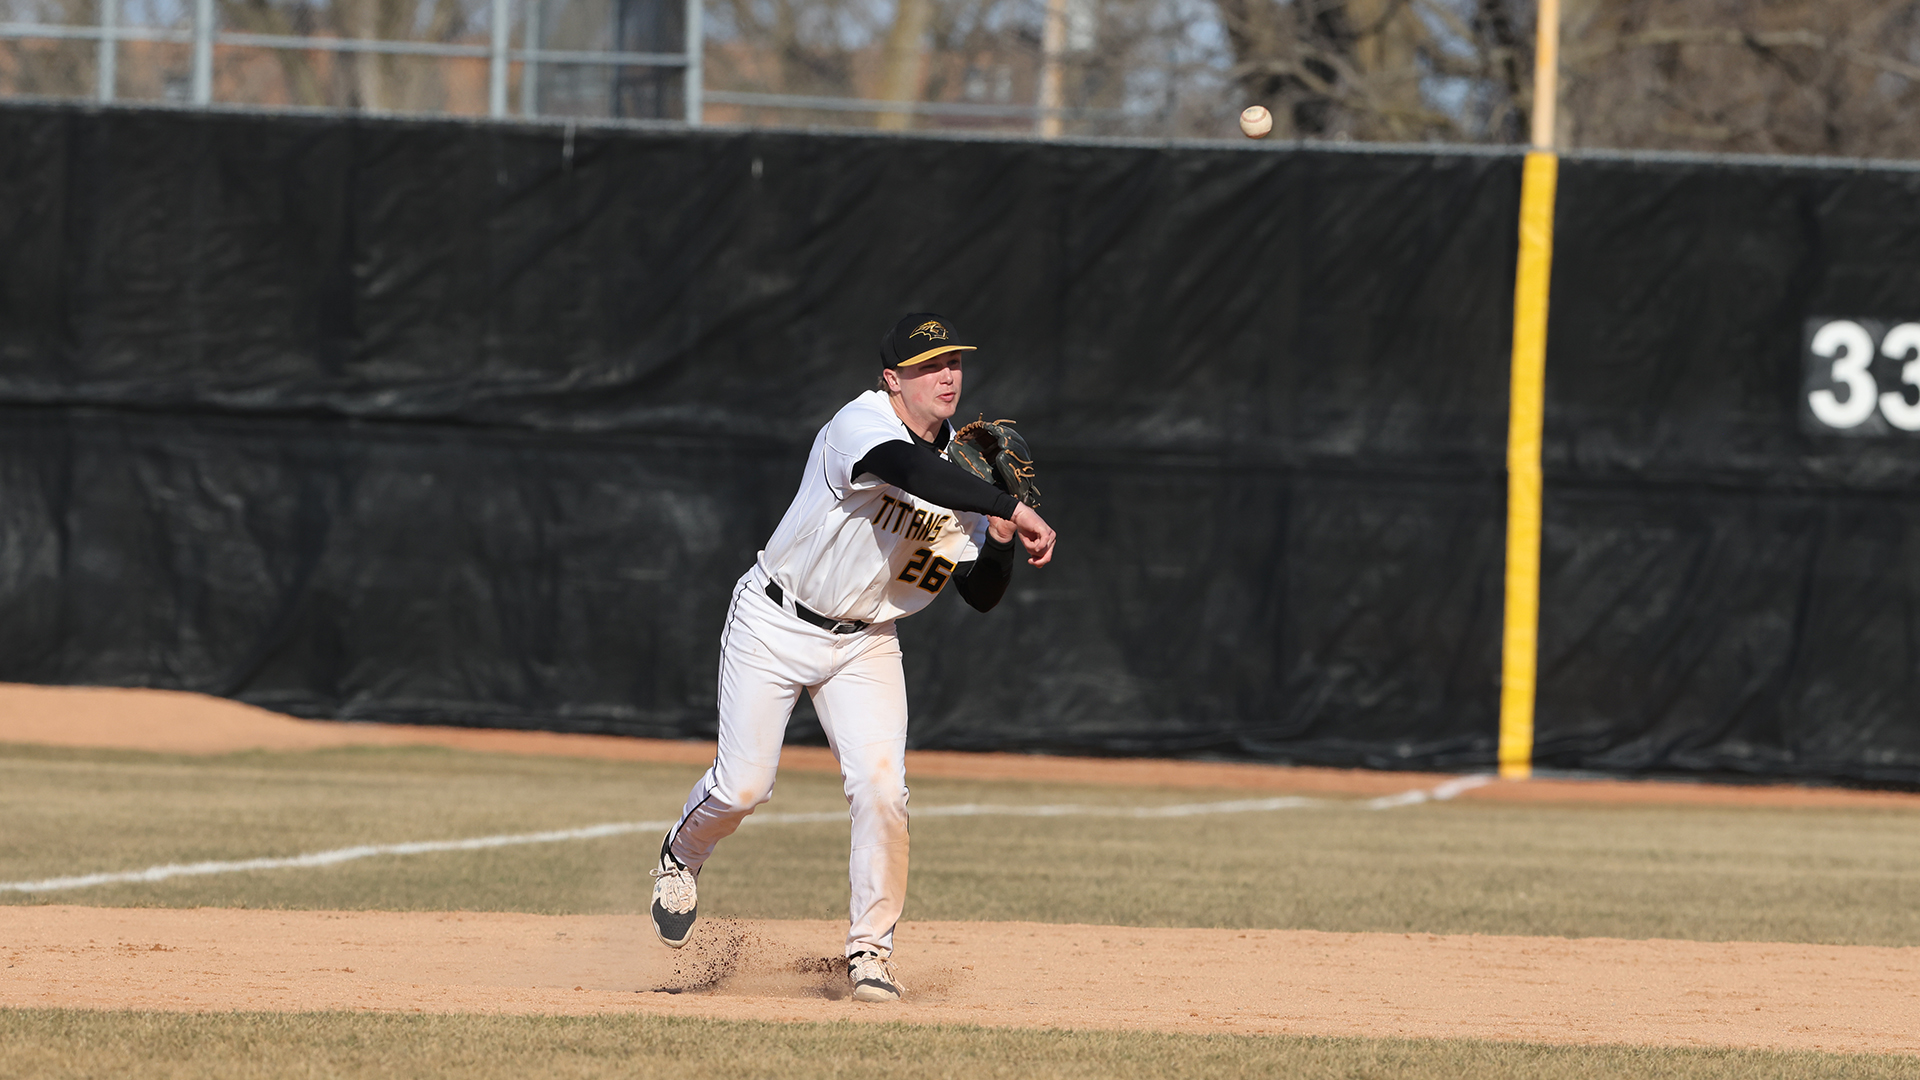 Mason Kirchberg drove in six runs and totaled three hits during the Titans' doubleheader sweep of UW-Eau Claire.